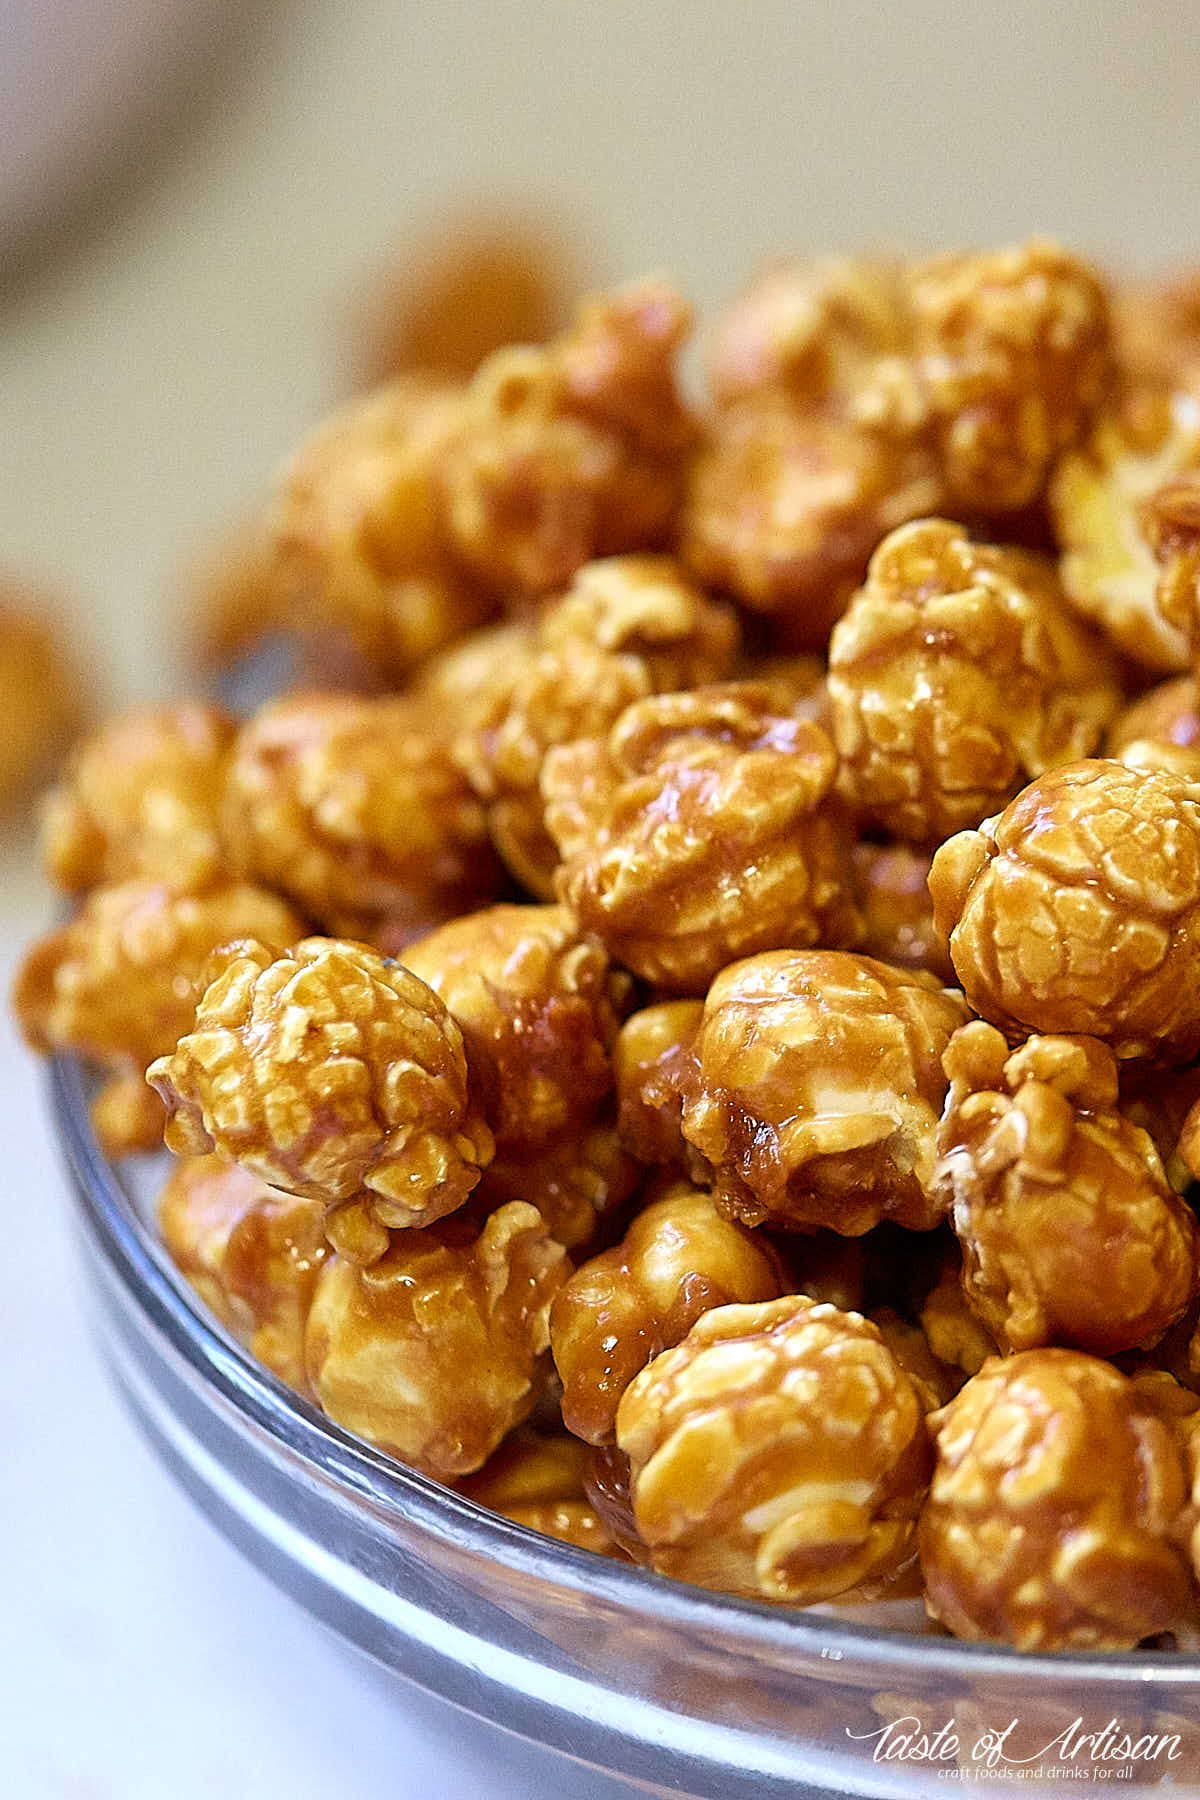 A side view of a glass bowl filled with delicious homemade caramel popcorn.